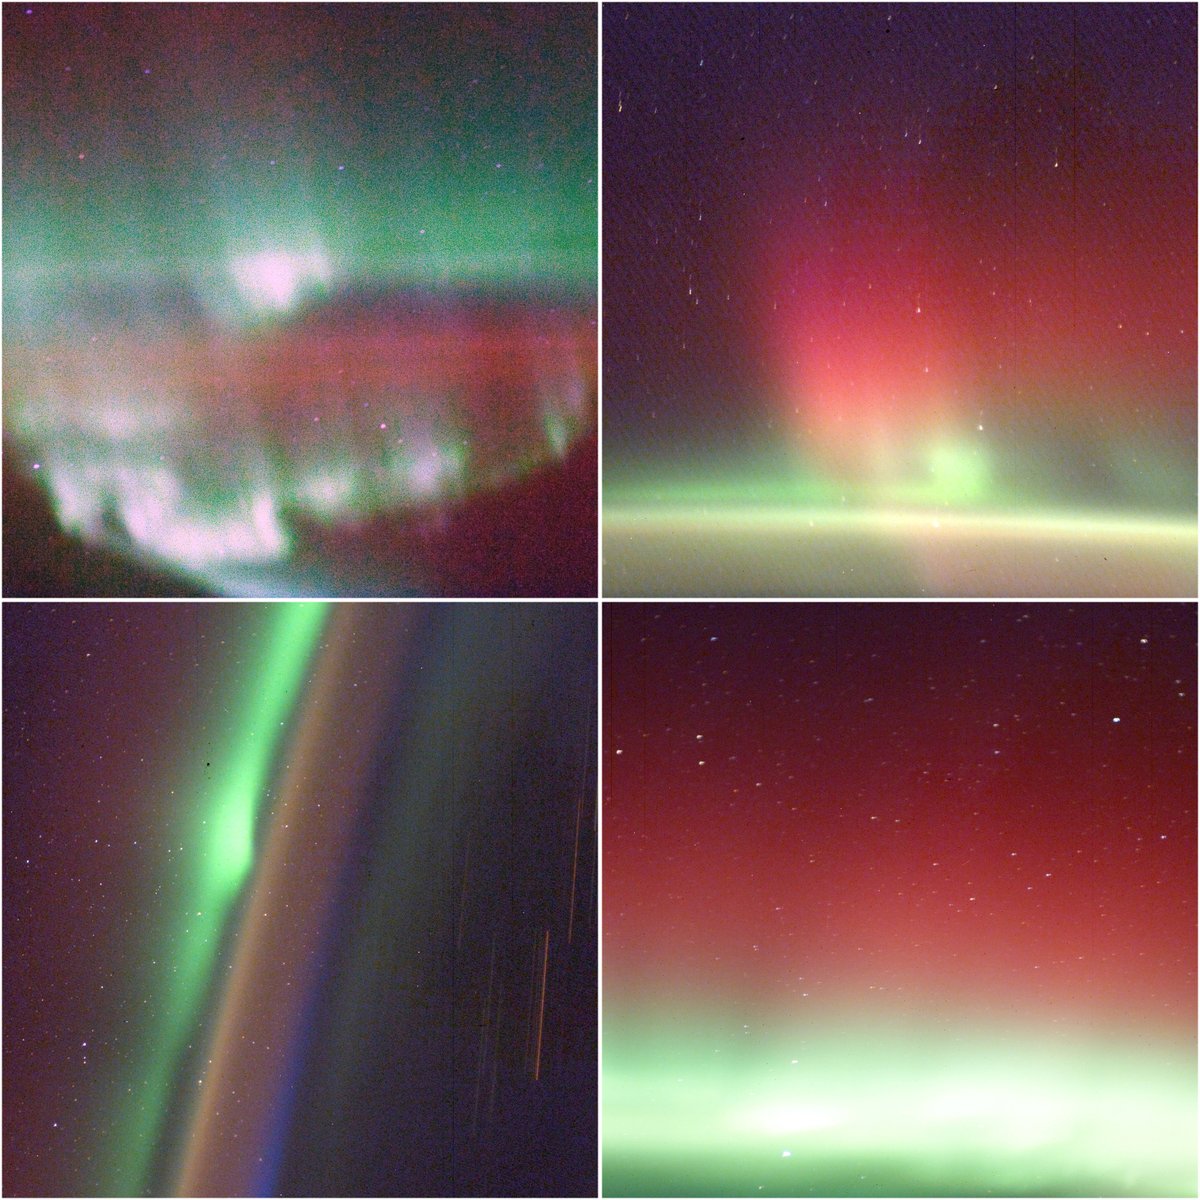 Added aurora colors today.  https://eol.jsc.nasa.gov/SearchPhotos/ShowQueryResults-Lightcycle.pl?results=158542953992802